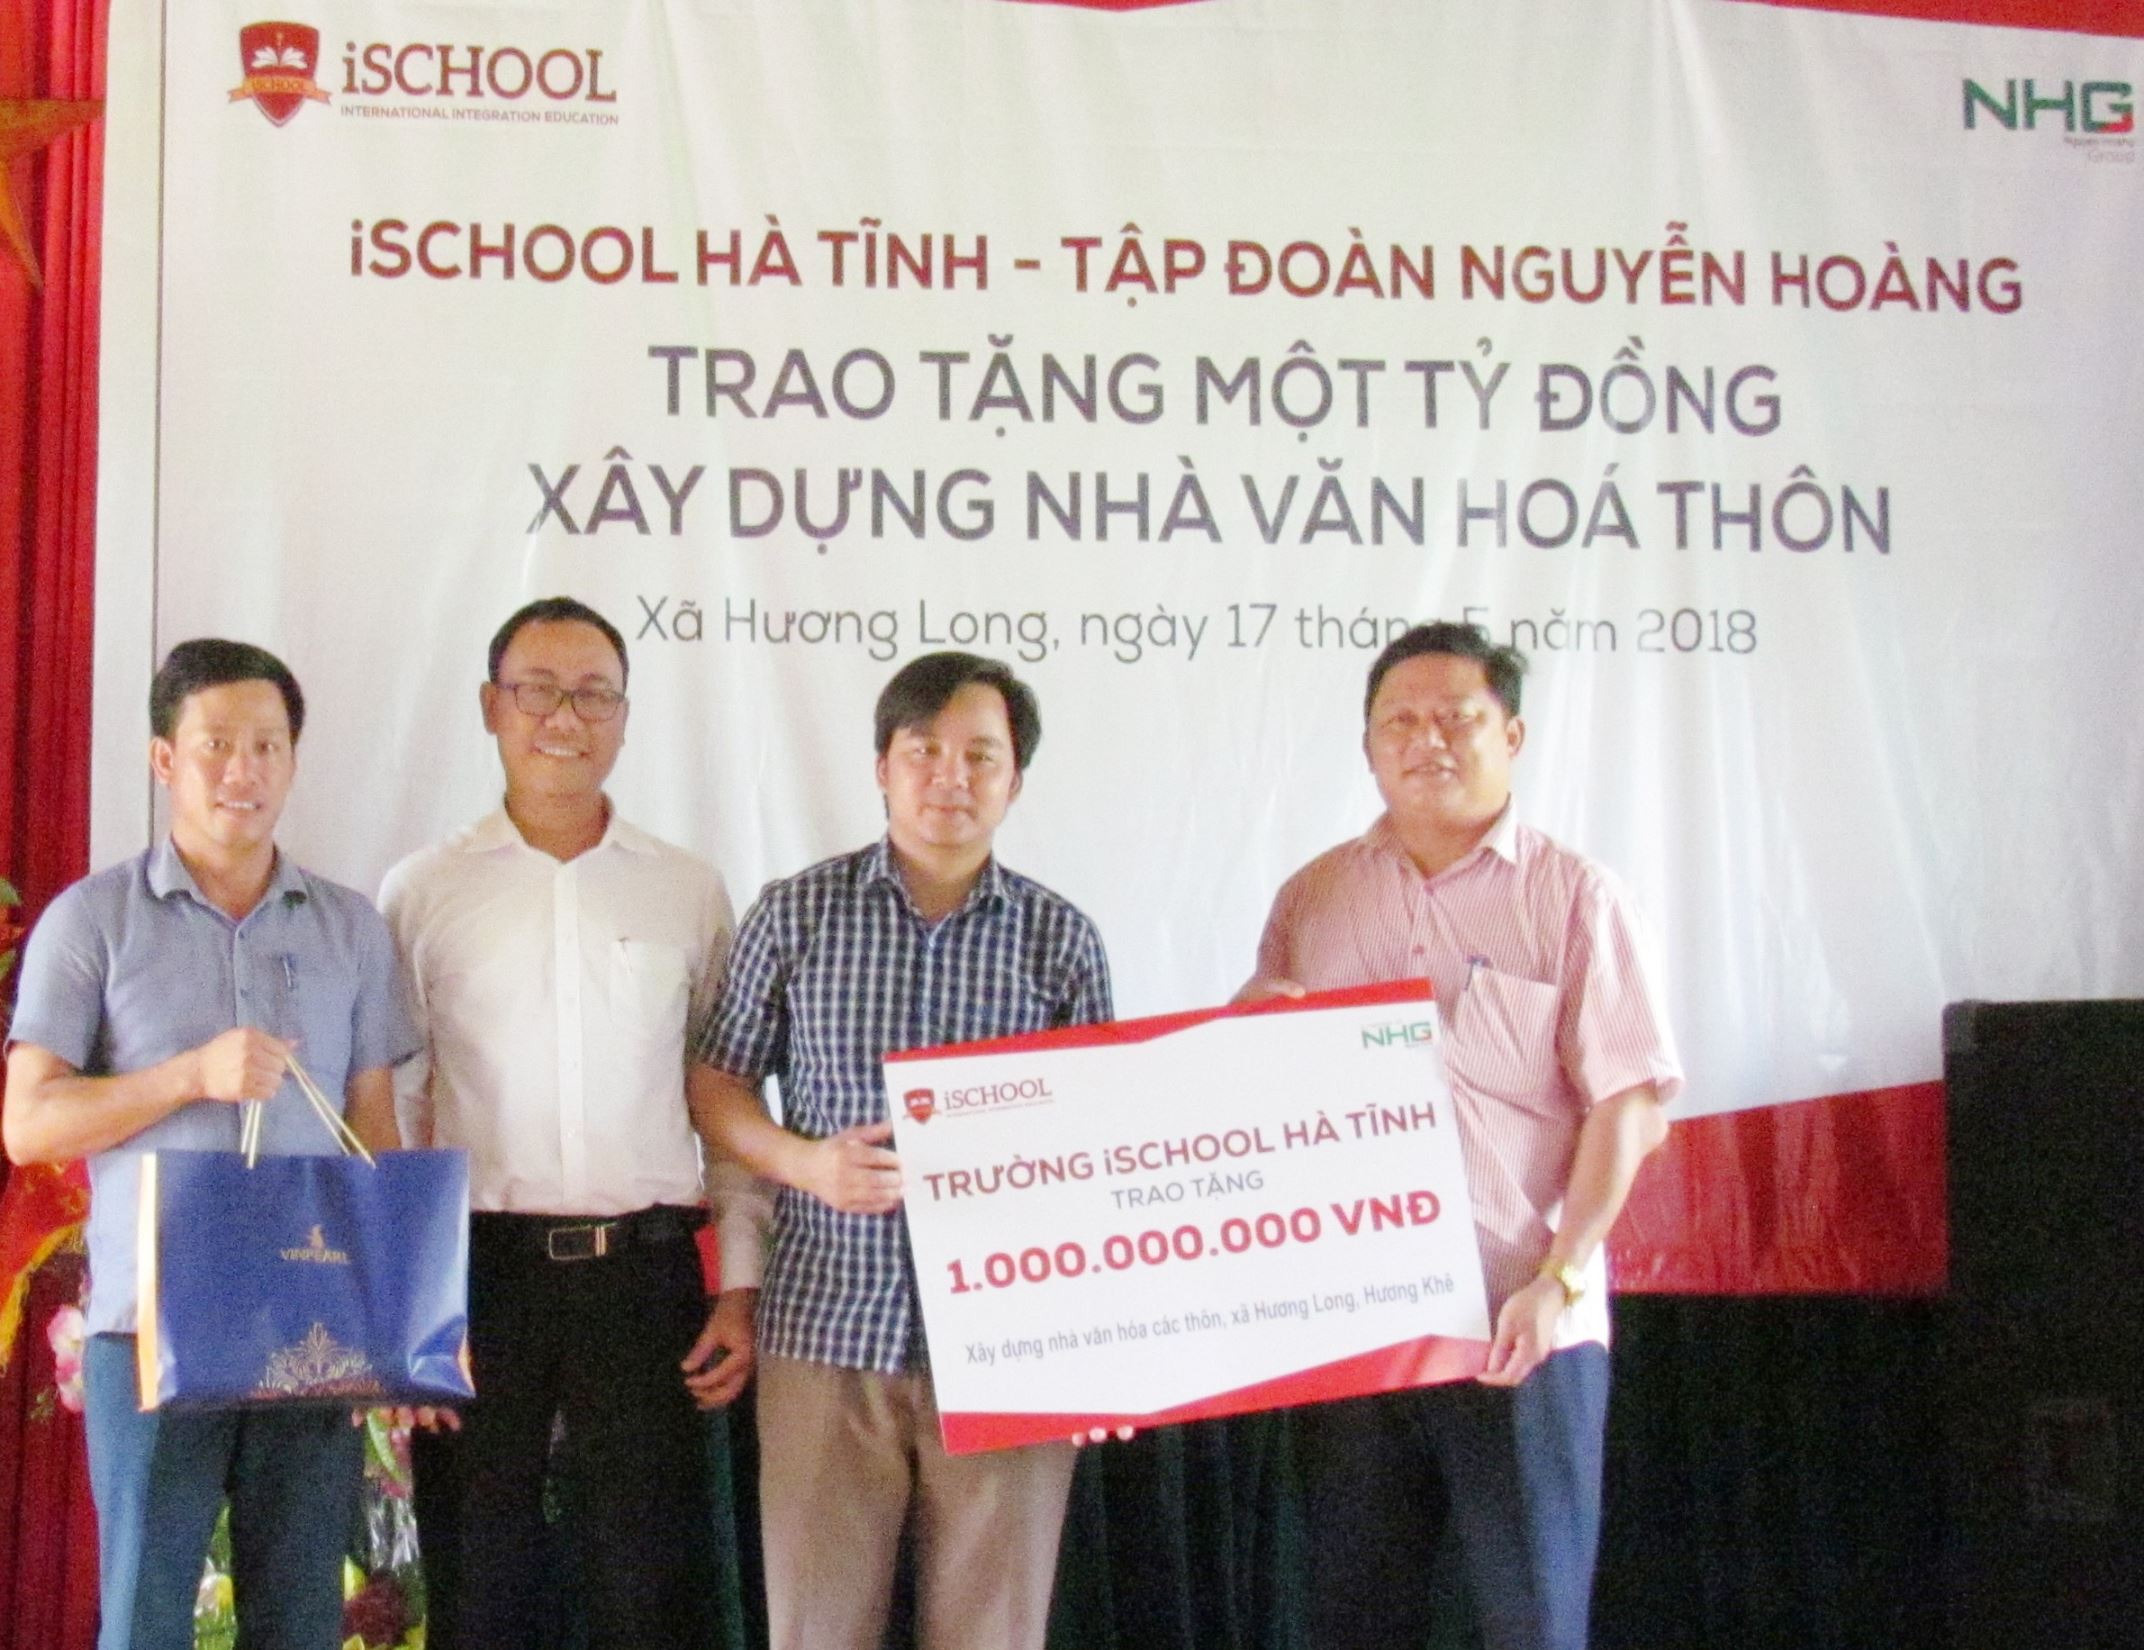 Mr. Nguyen Ngoc Tuan, on behalf of iSchool Ha Tinh, donated a billion VND to the establishment of the Culture House in Huong Long commune